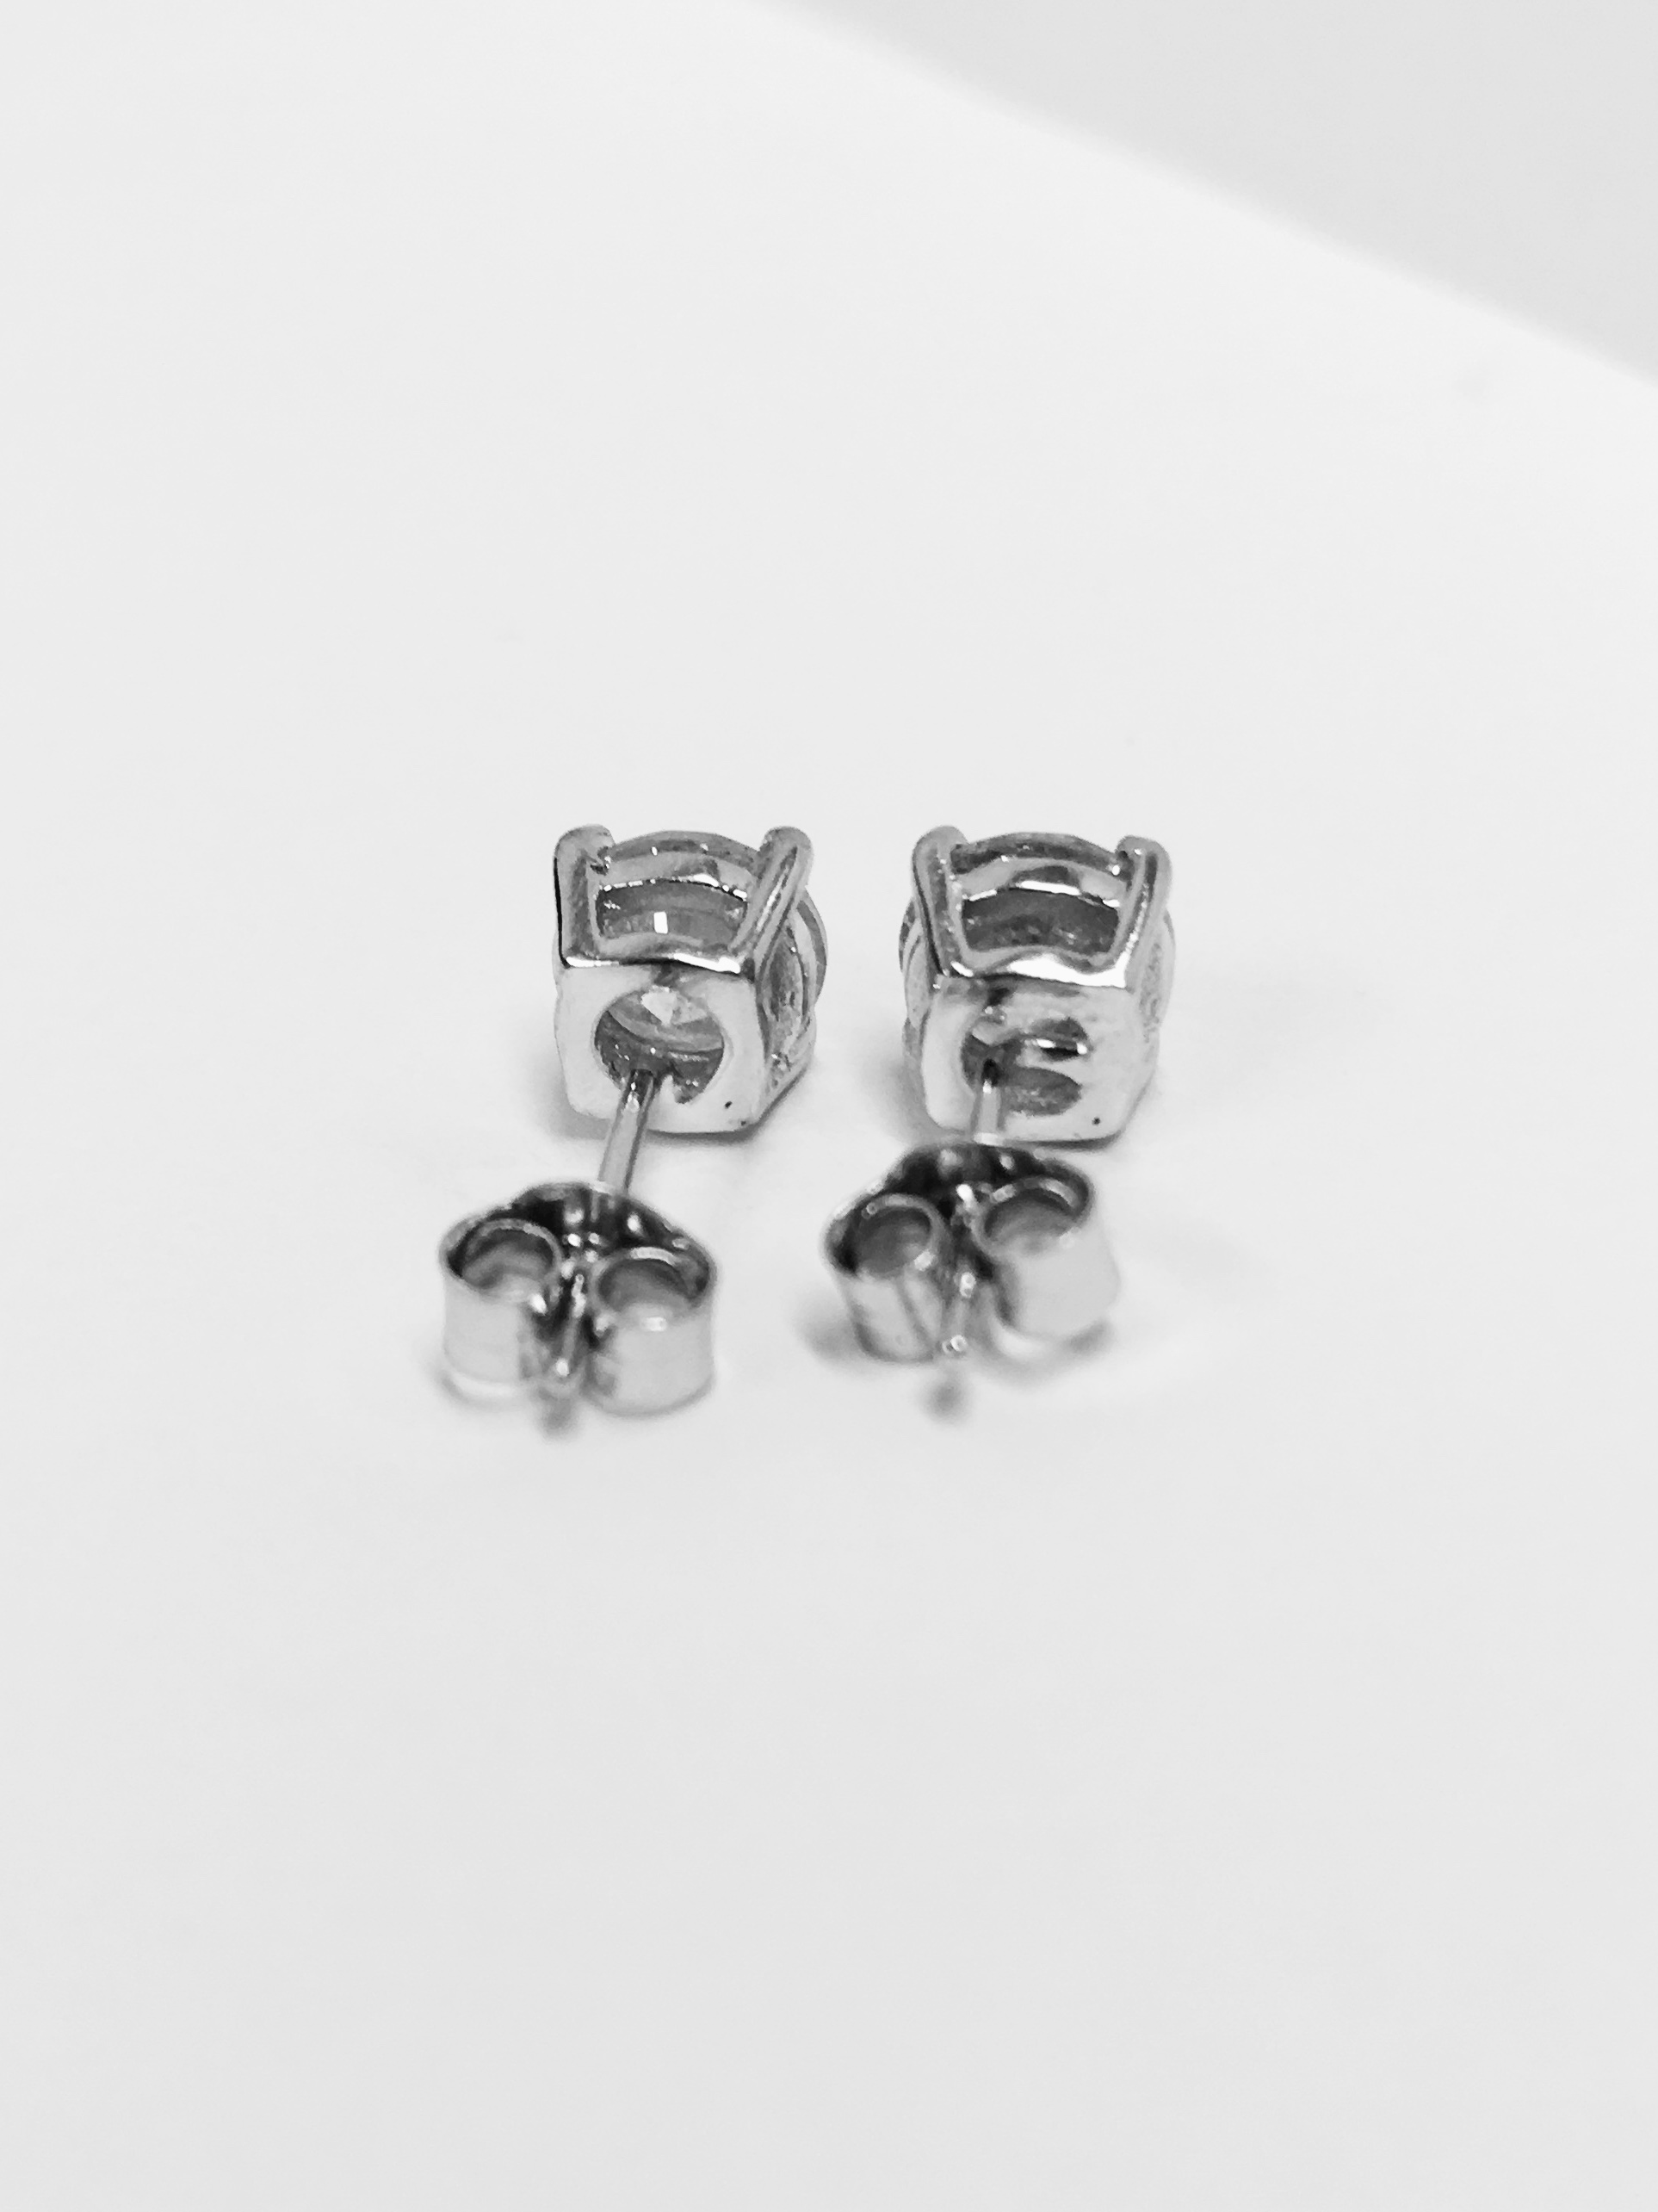 1ct diamond solitaire earrings - Image 24 of 24